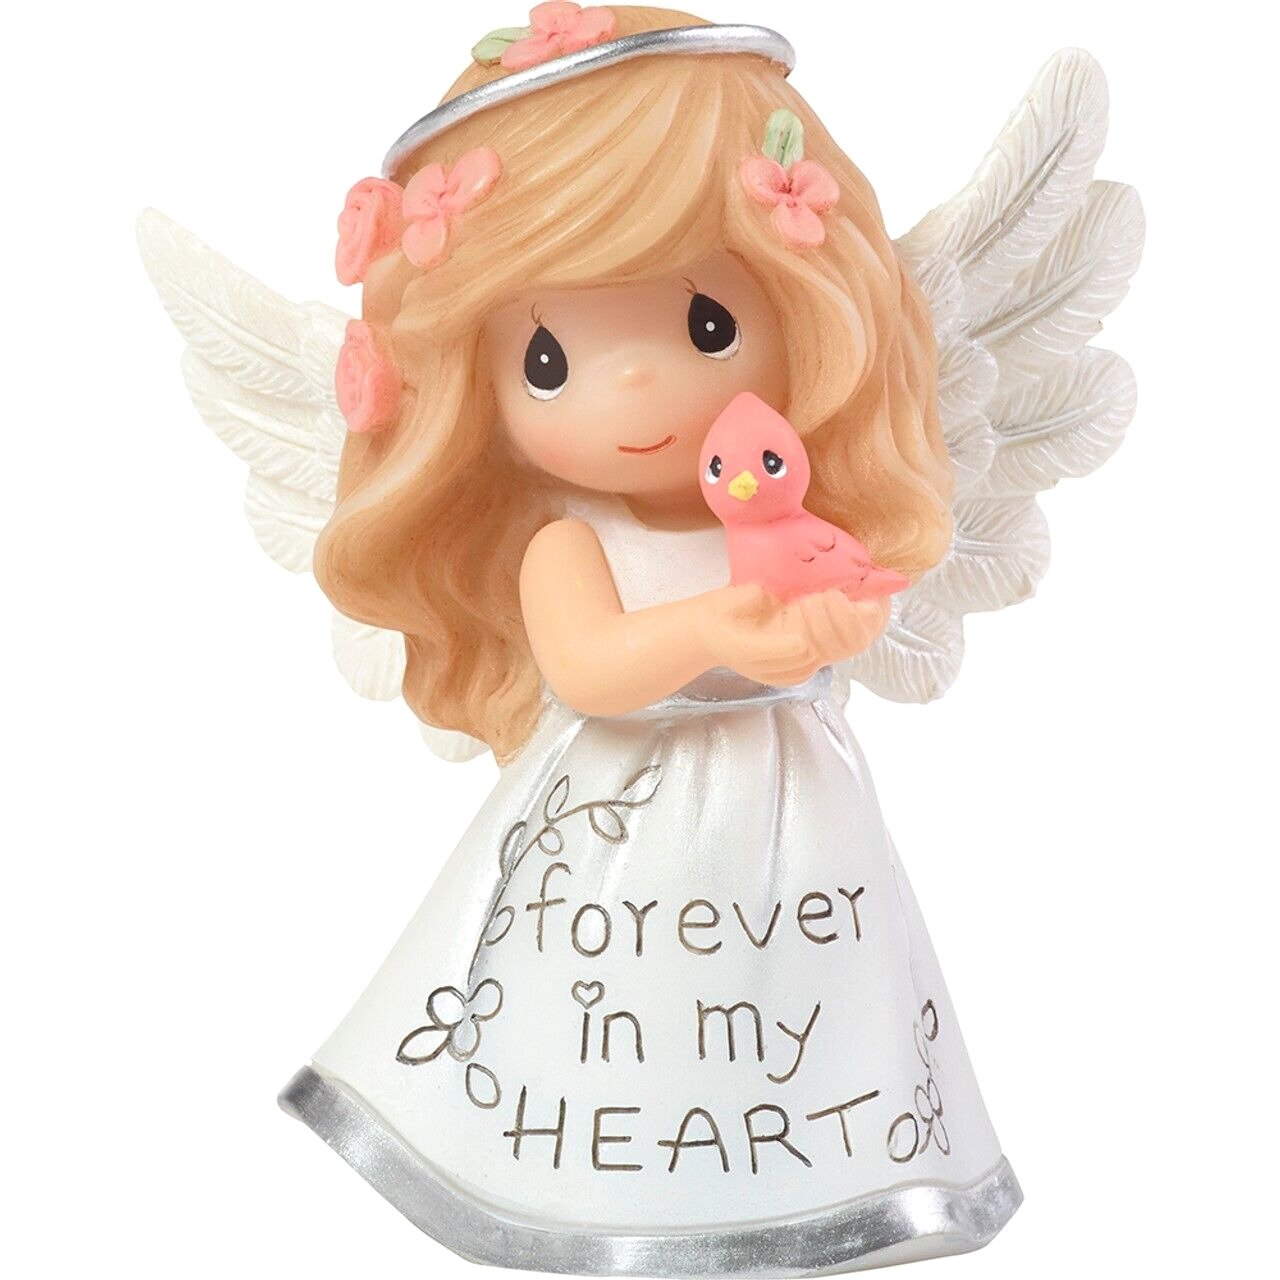 ✿ New PRECIOUS MOMENTS Figurine FOREVER IN MY HEART Angel Memorial Statue 183428